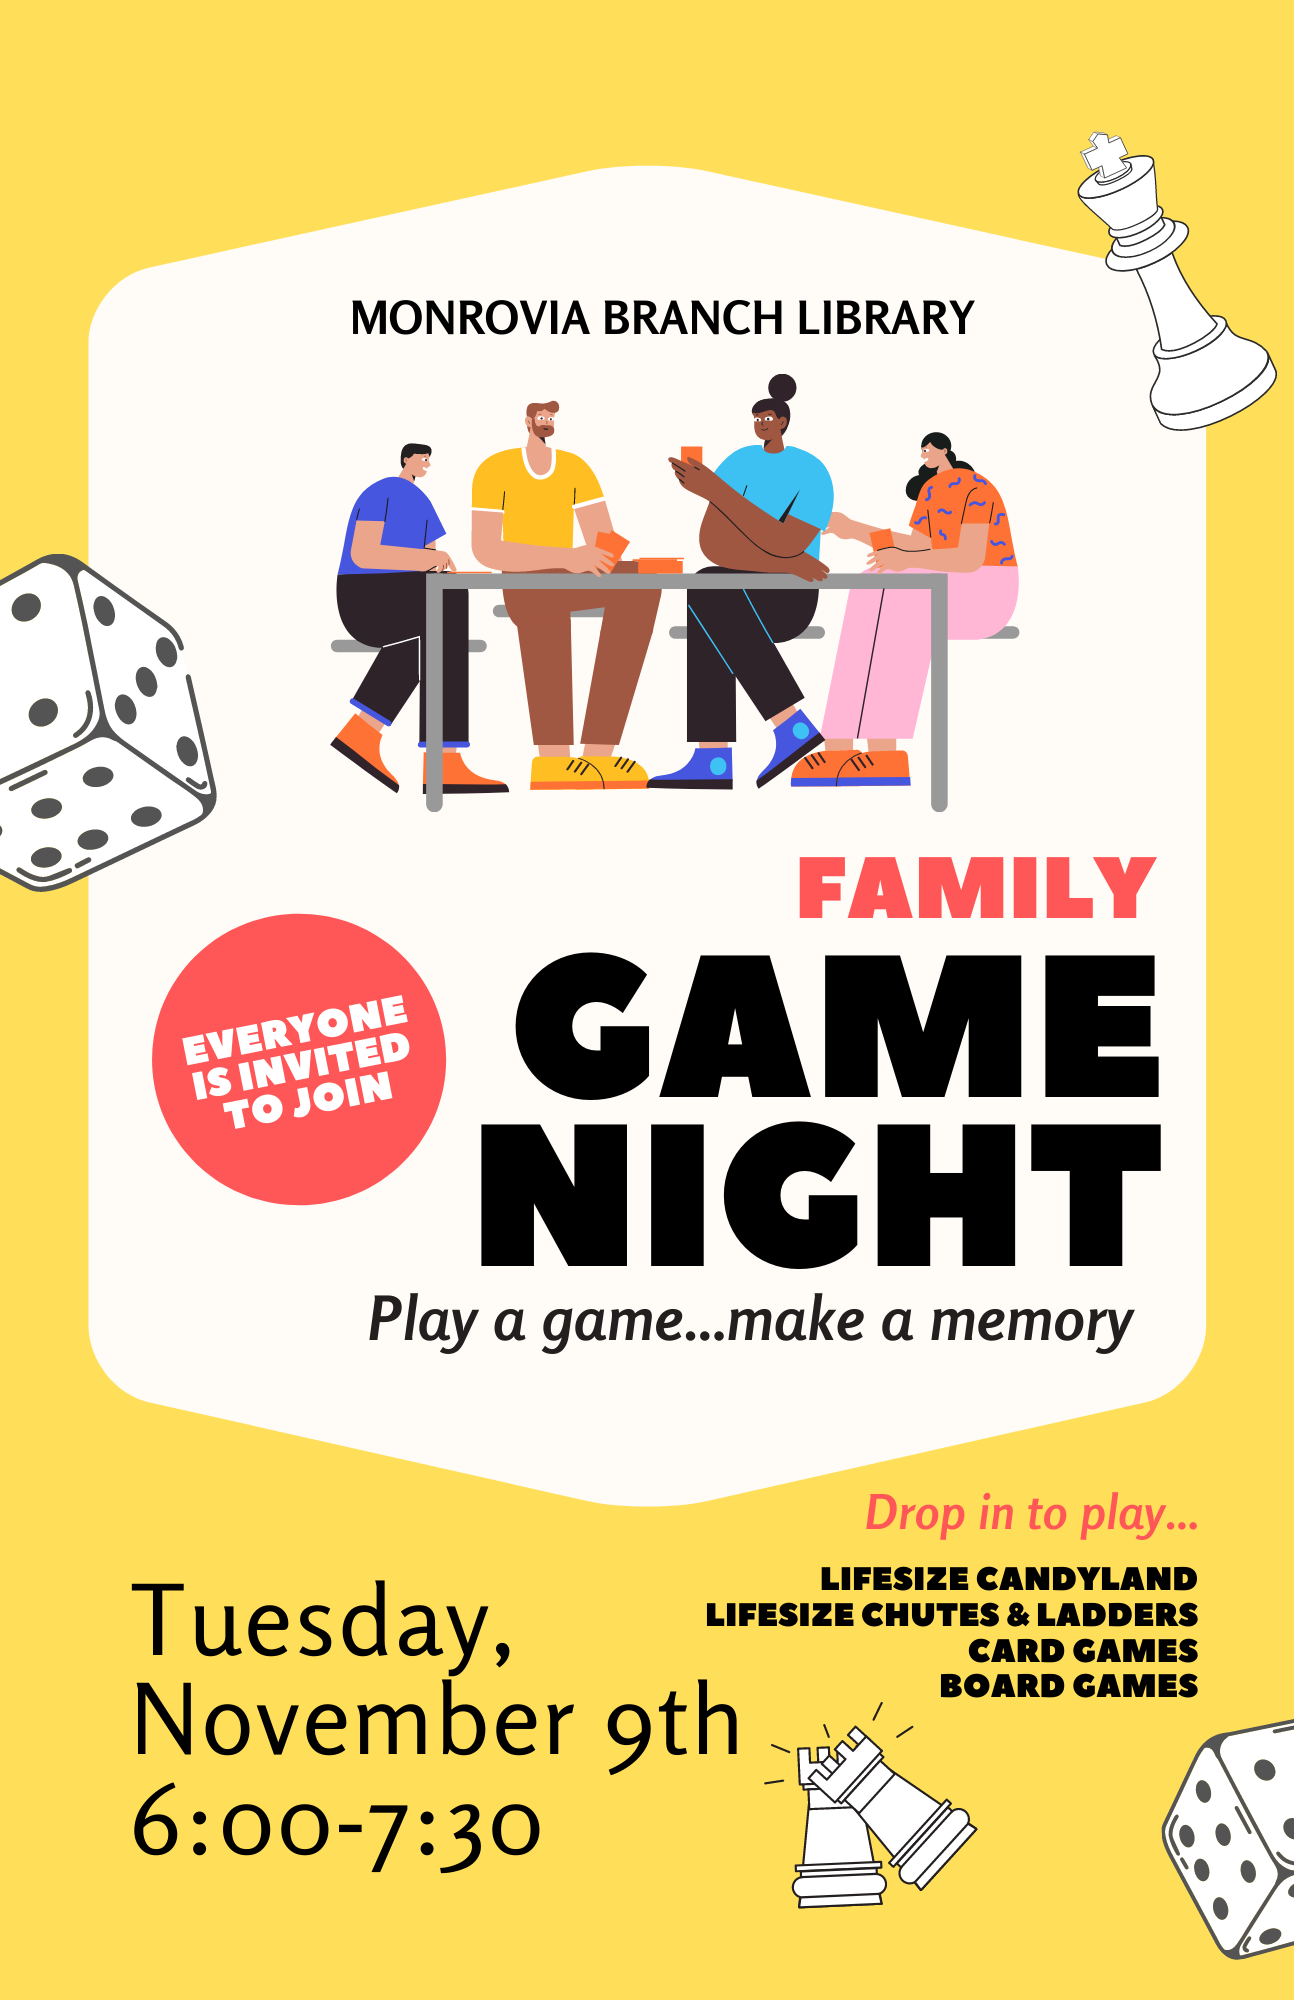 yellow background, 4 people setting at a table, black and pinkish text about family game night